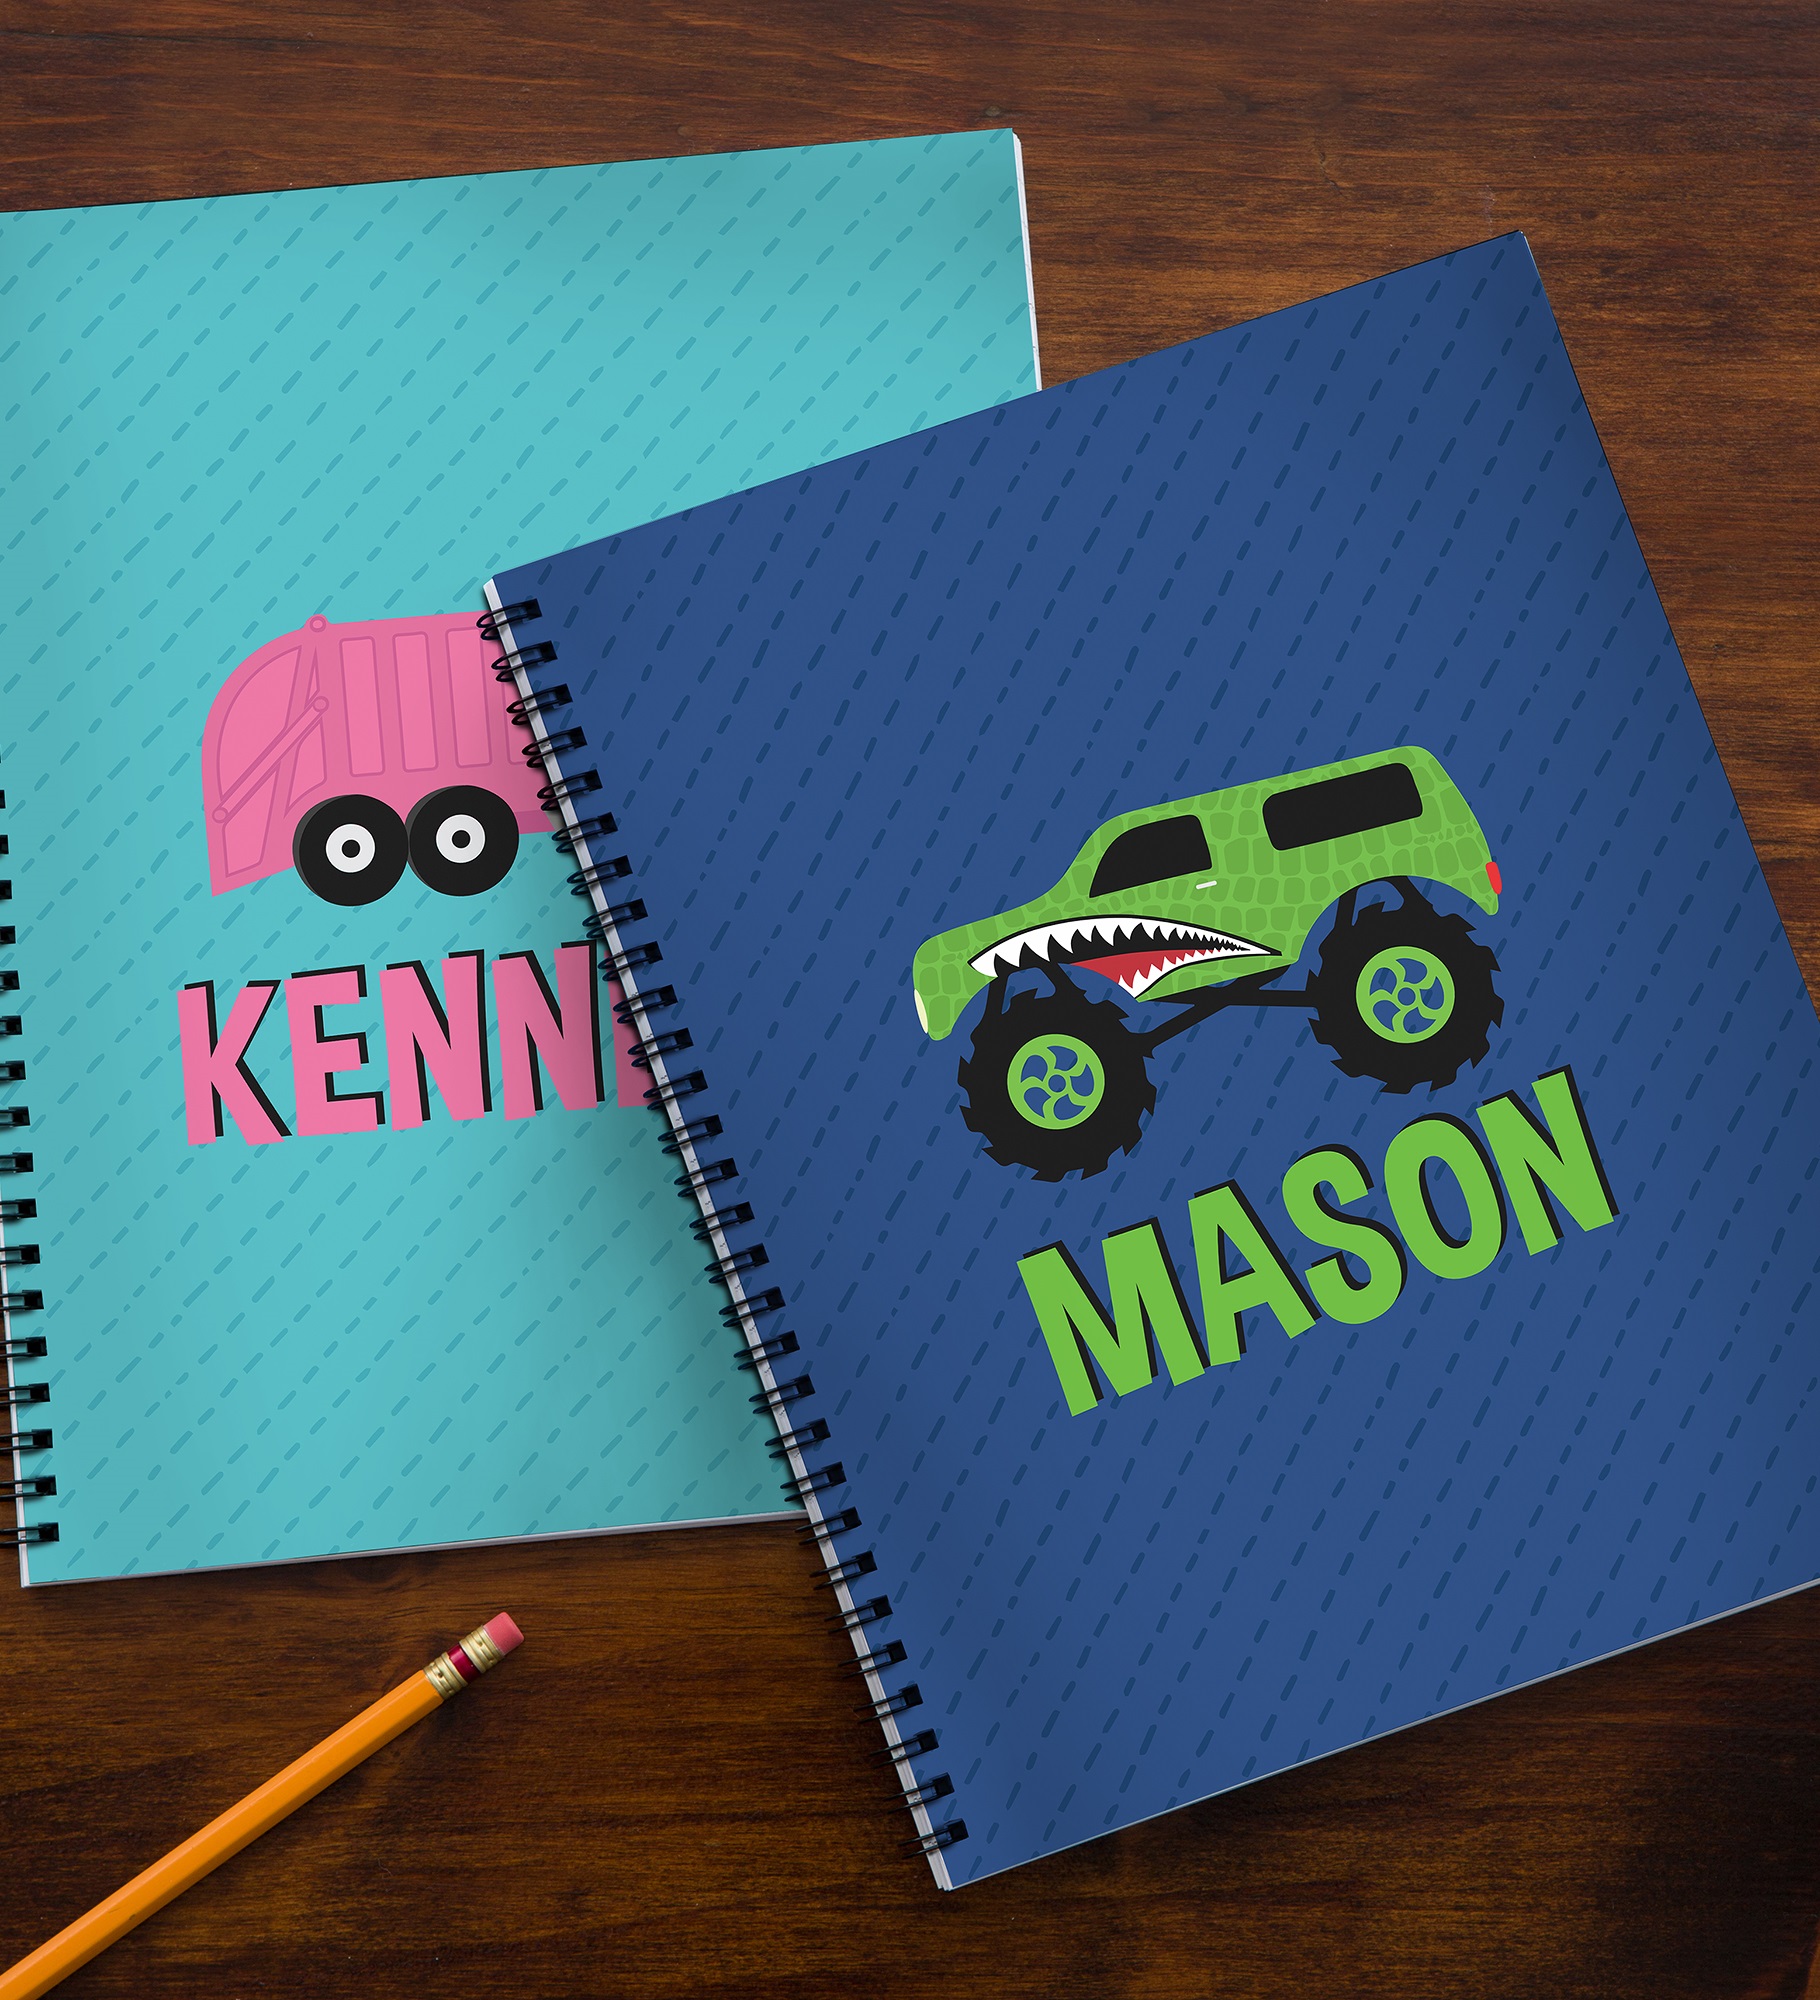 Construction & Monster Trucks Personalized Large Notebooks-Set of 2